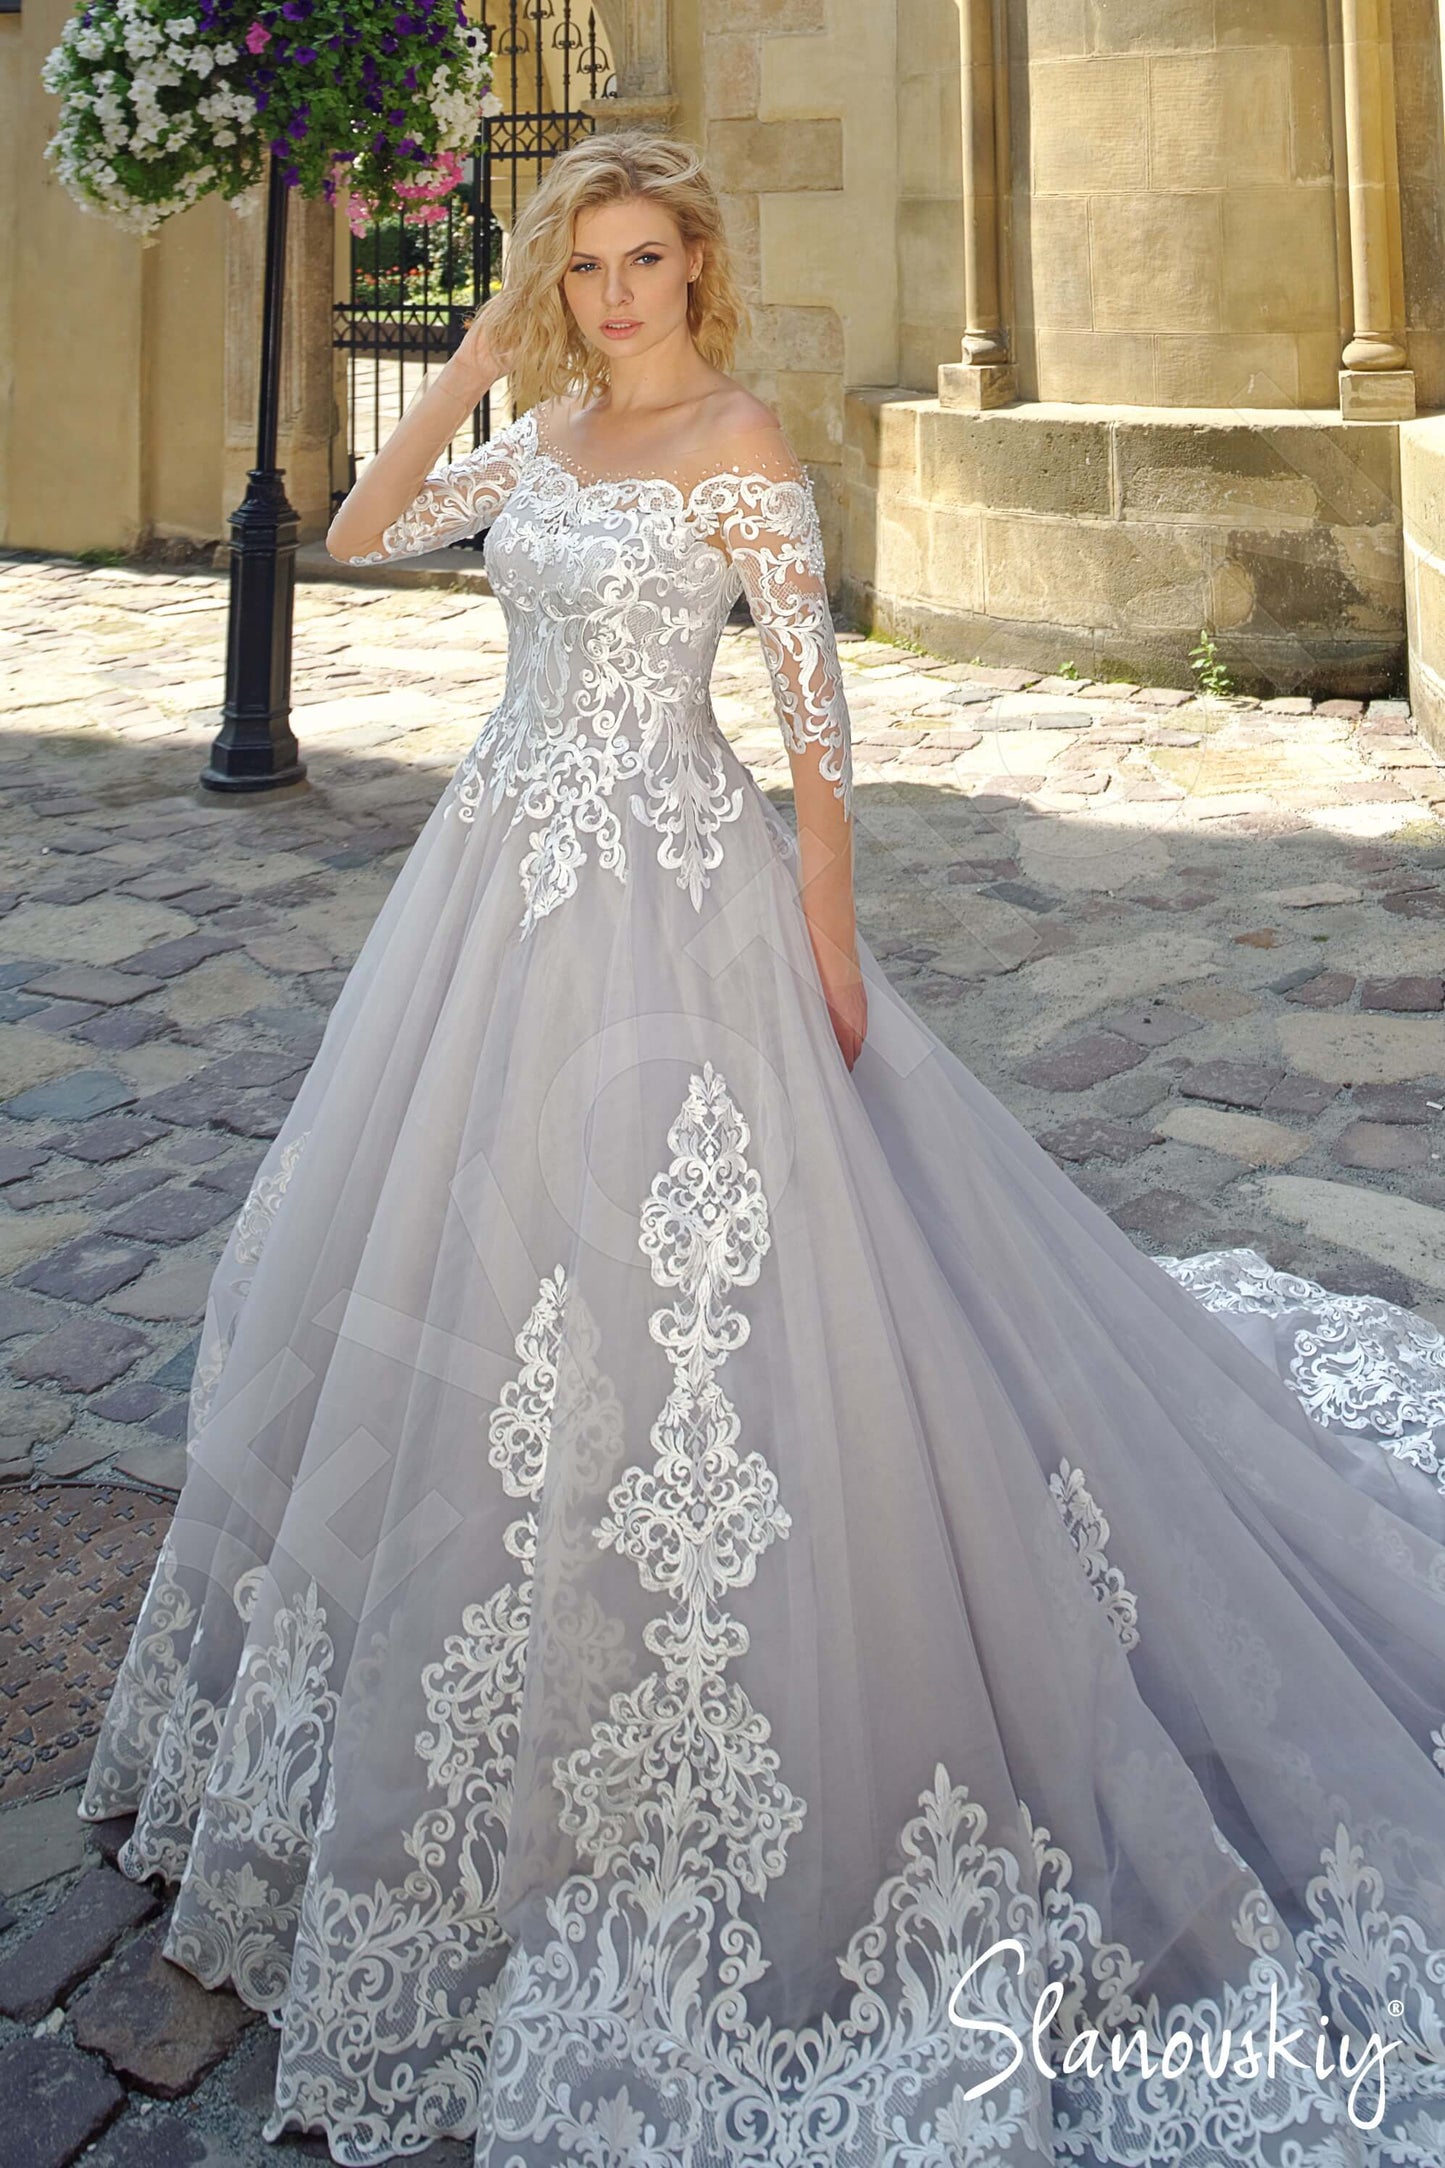 Vicky Illusion back Princess/Ball Gown 3/4 sleeve Wedding Dress Front